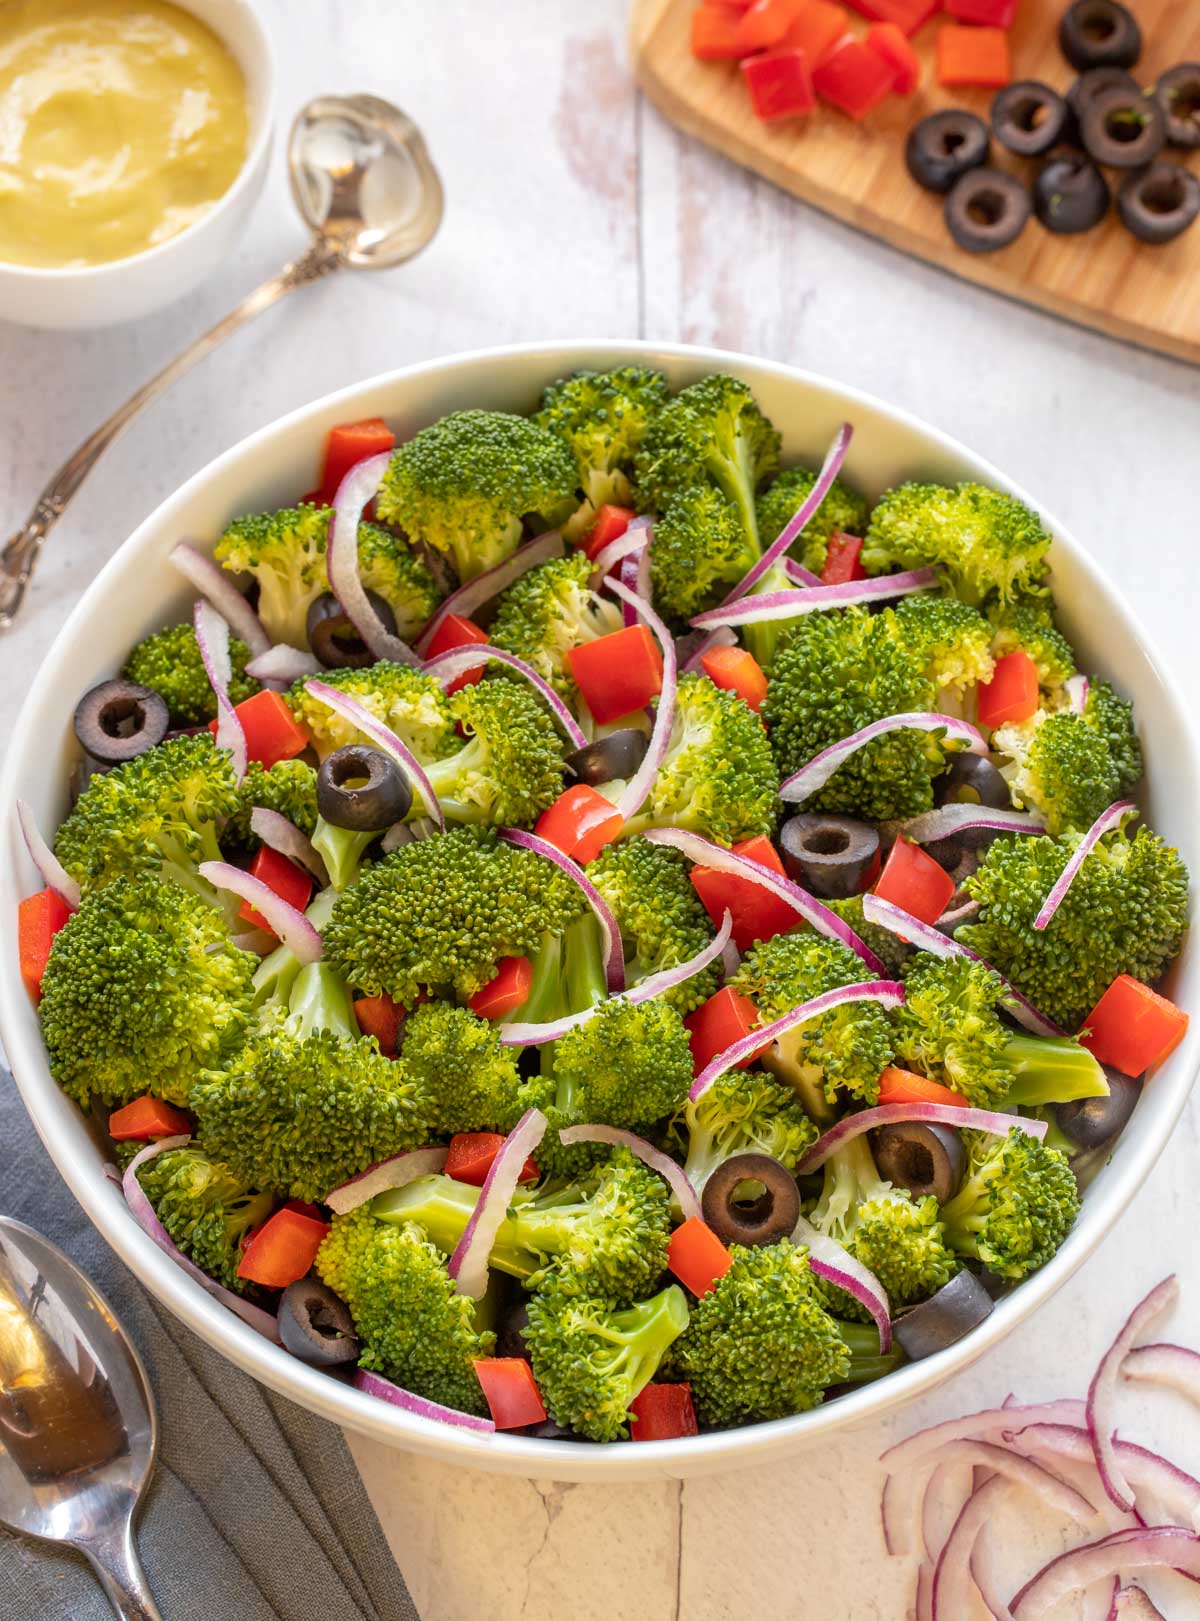 Oval white bowl holding Best Broccoli Salad with Caesar Dressing on the side